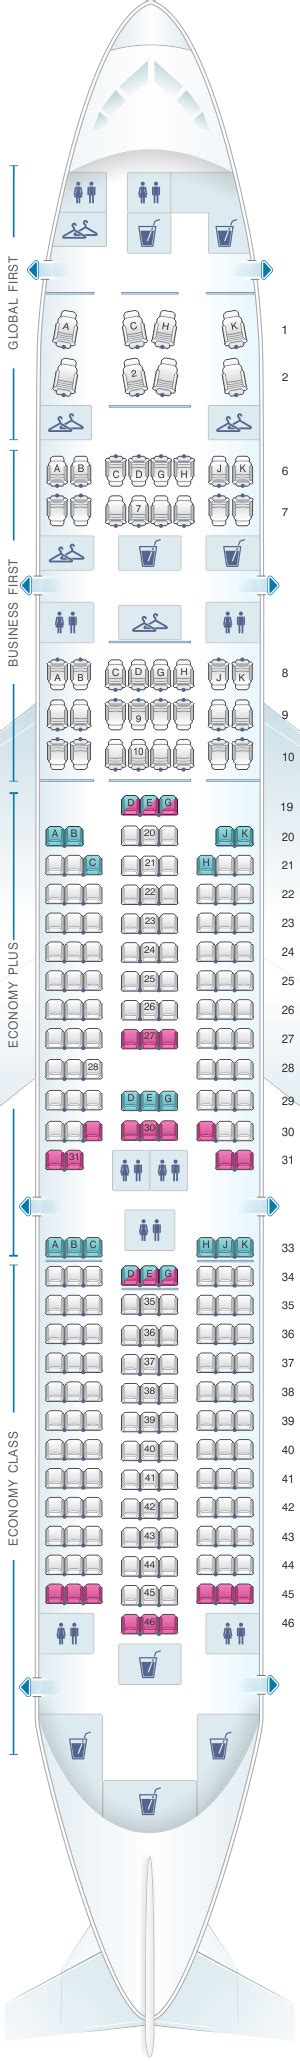 United airlines seating chart 777-200. Things To Know About United airlines seating chart 777-200. 